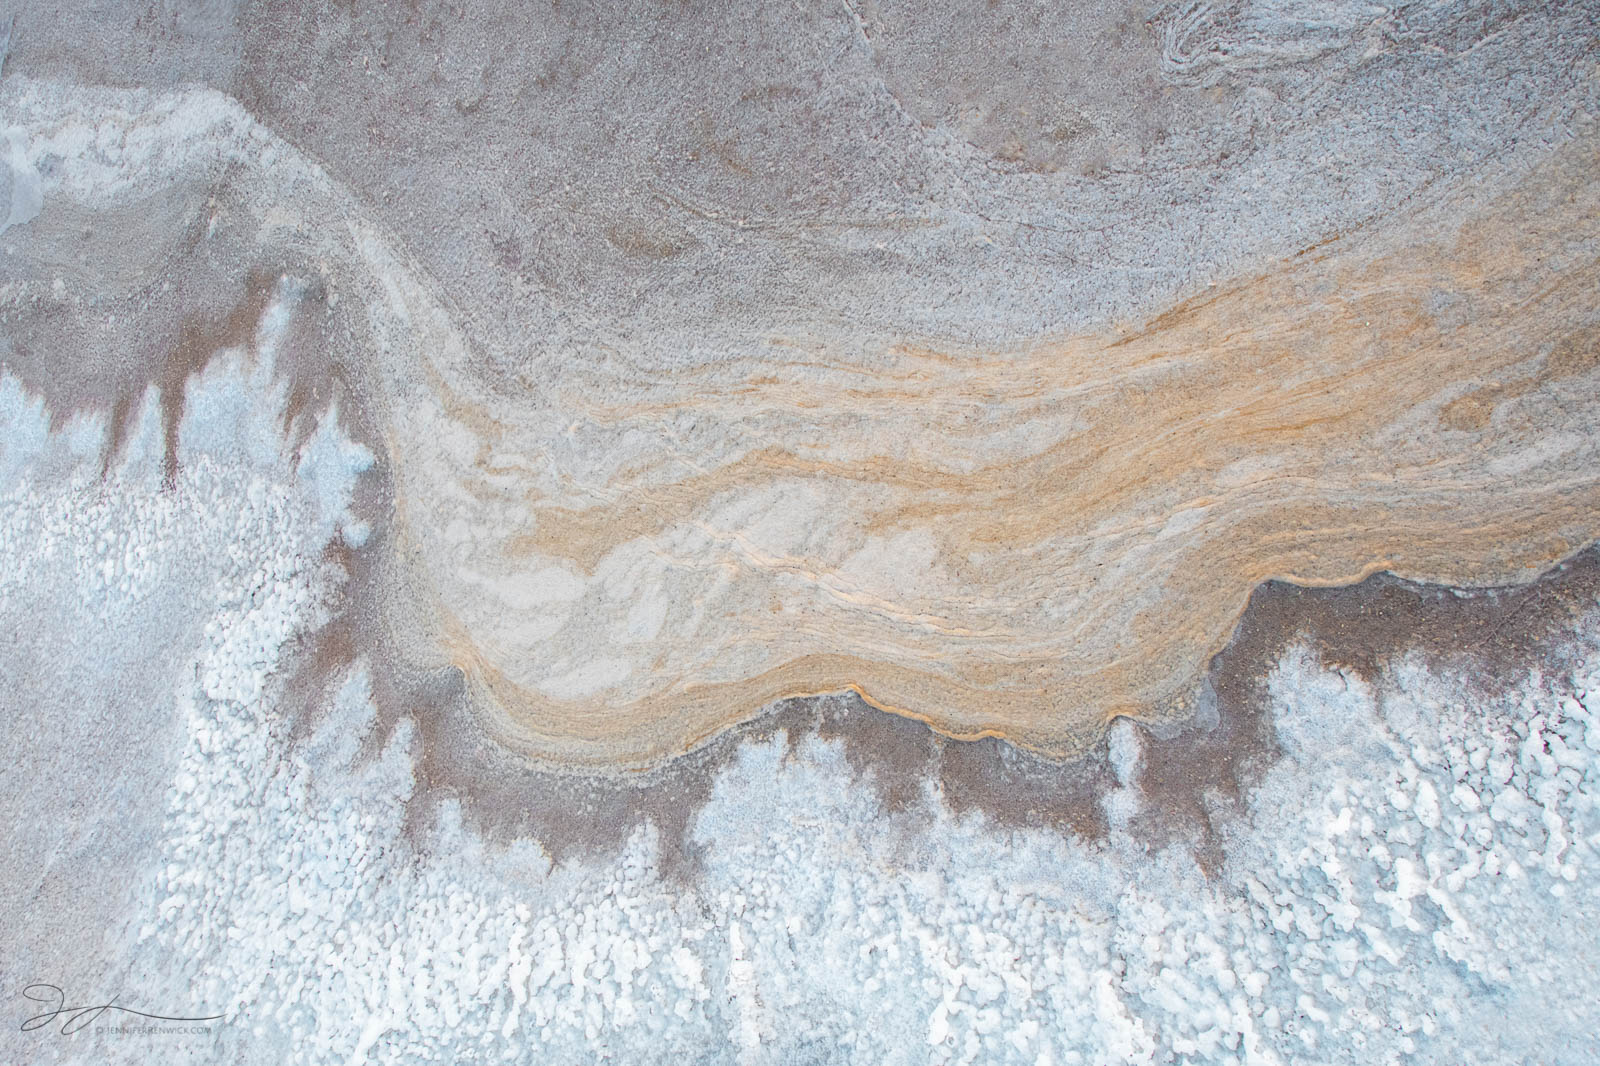 Deposits on the desert floor resemble a seashore with an incoming "wave."